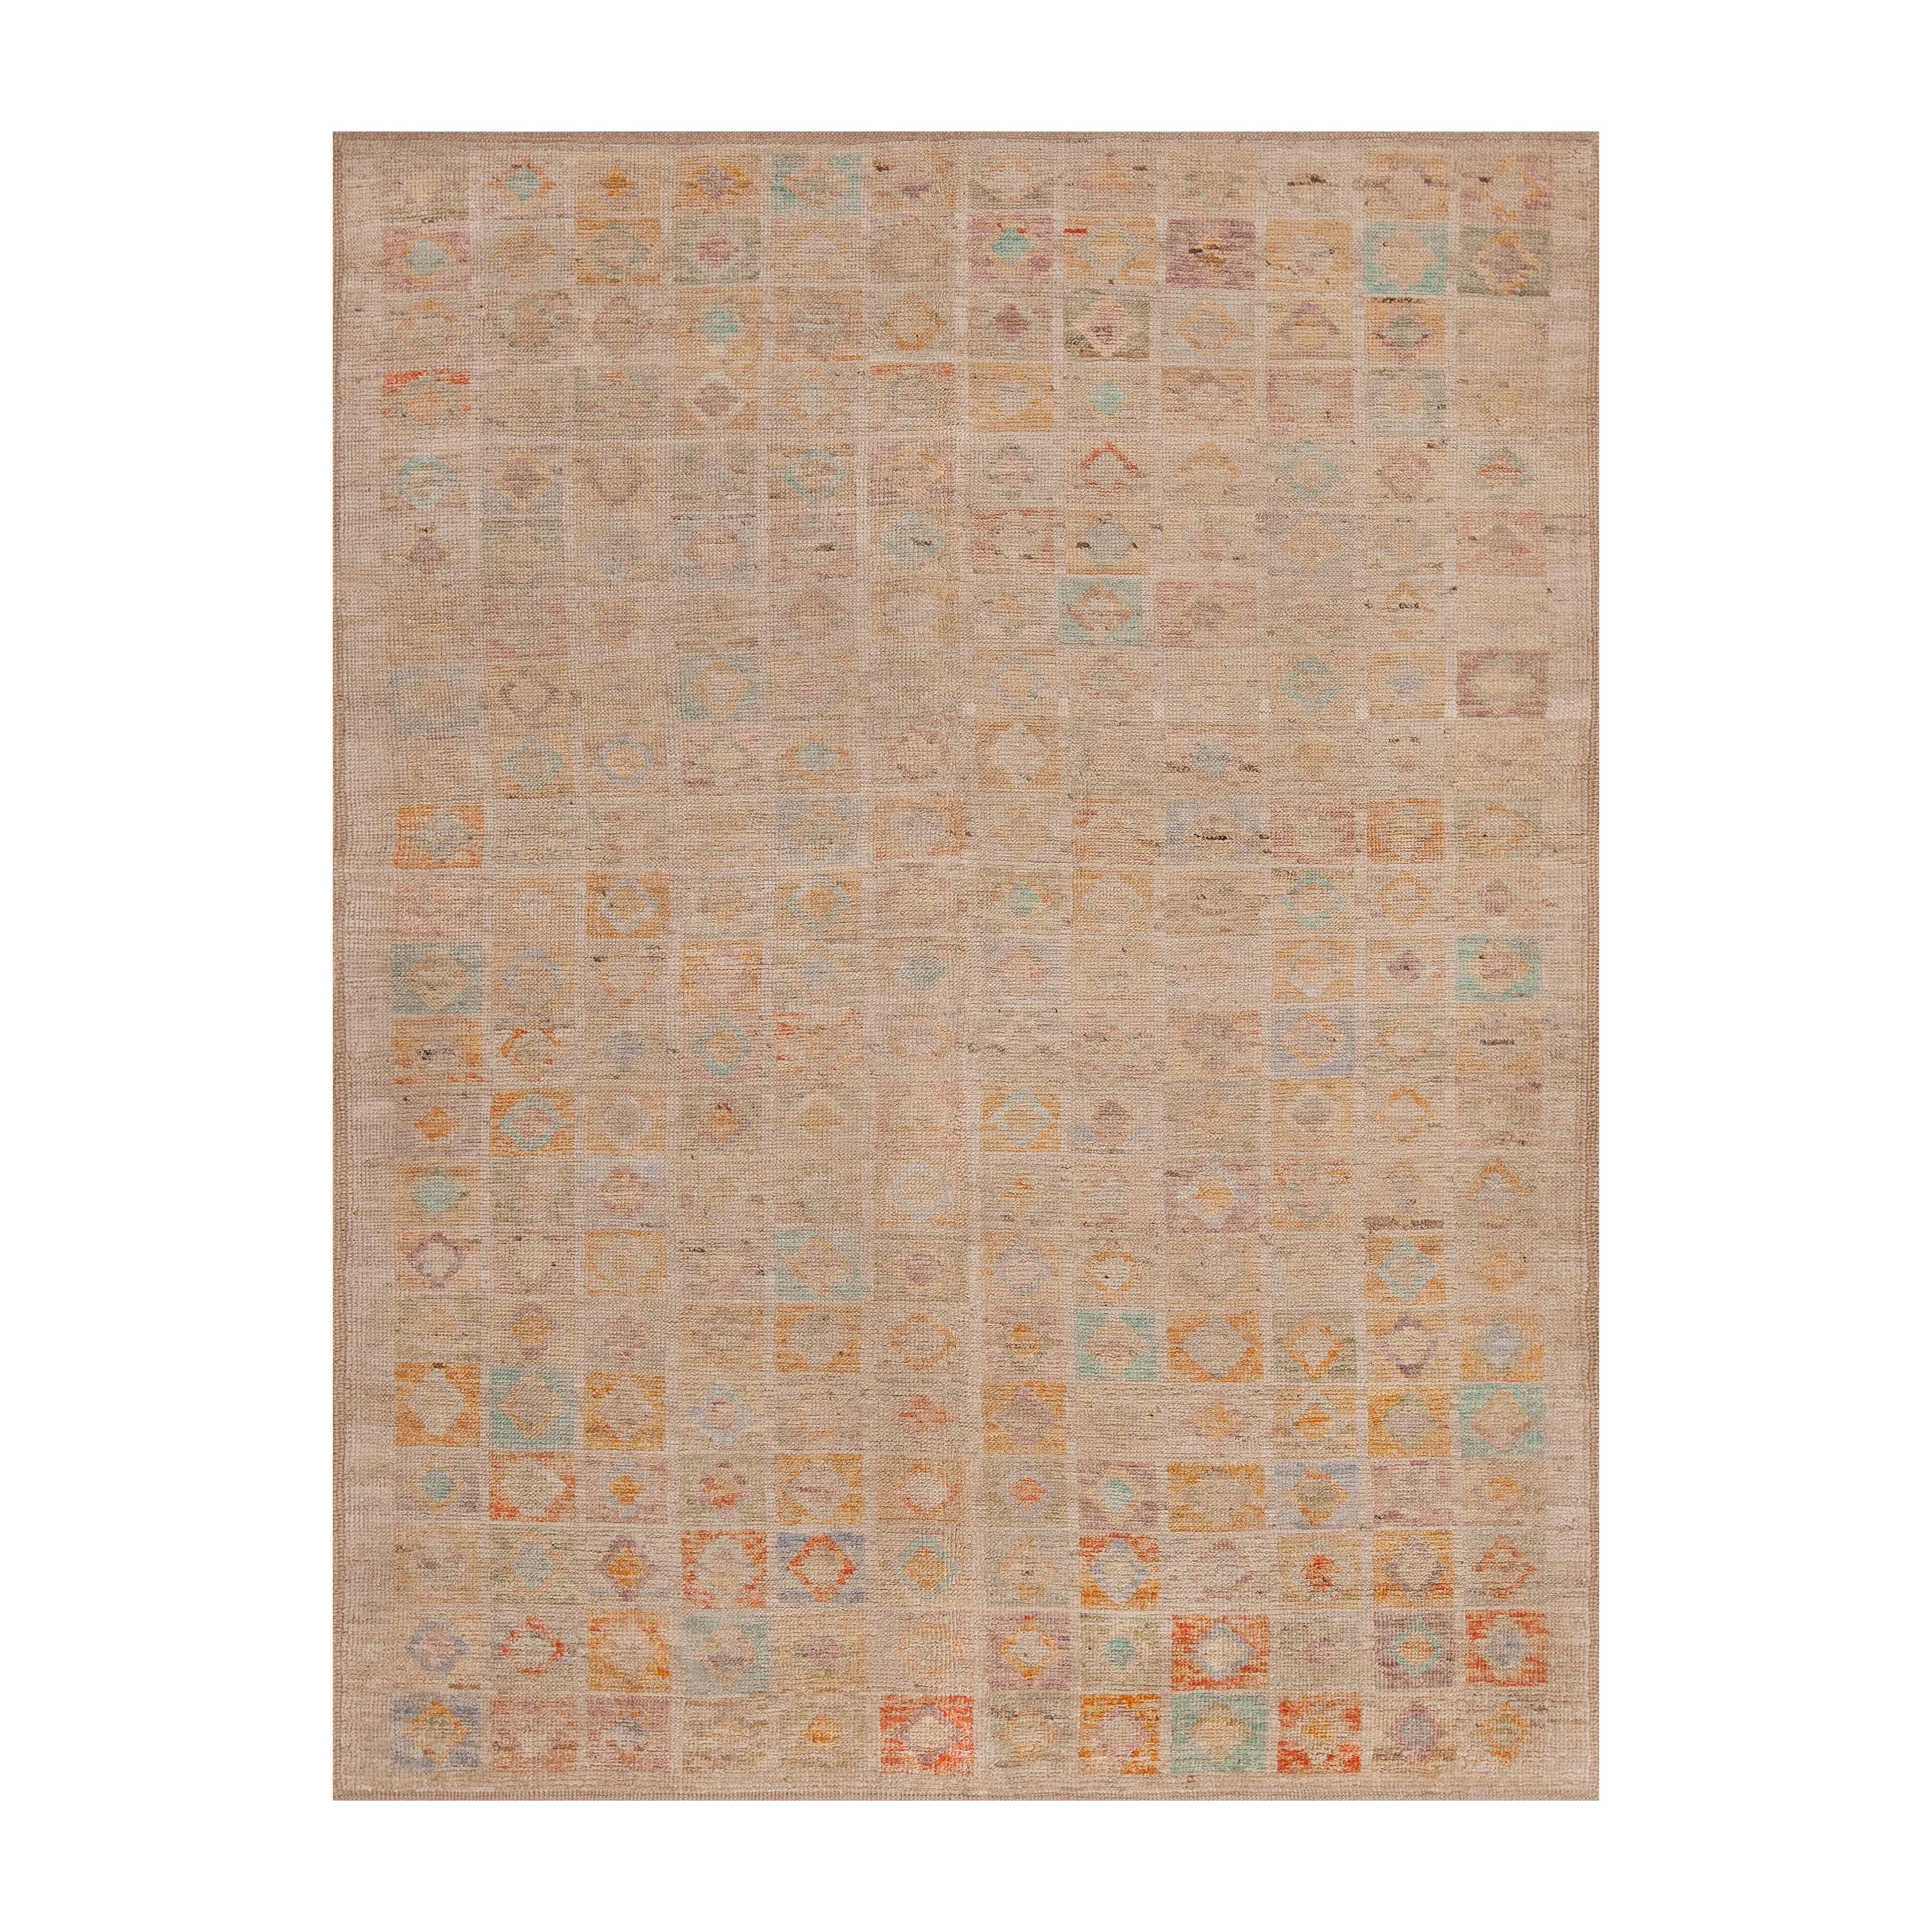 Nazmiyal Collection Large Modern Rustic Geometric Allover Area Rug 5'1" x 6'7" For Sale